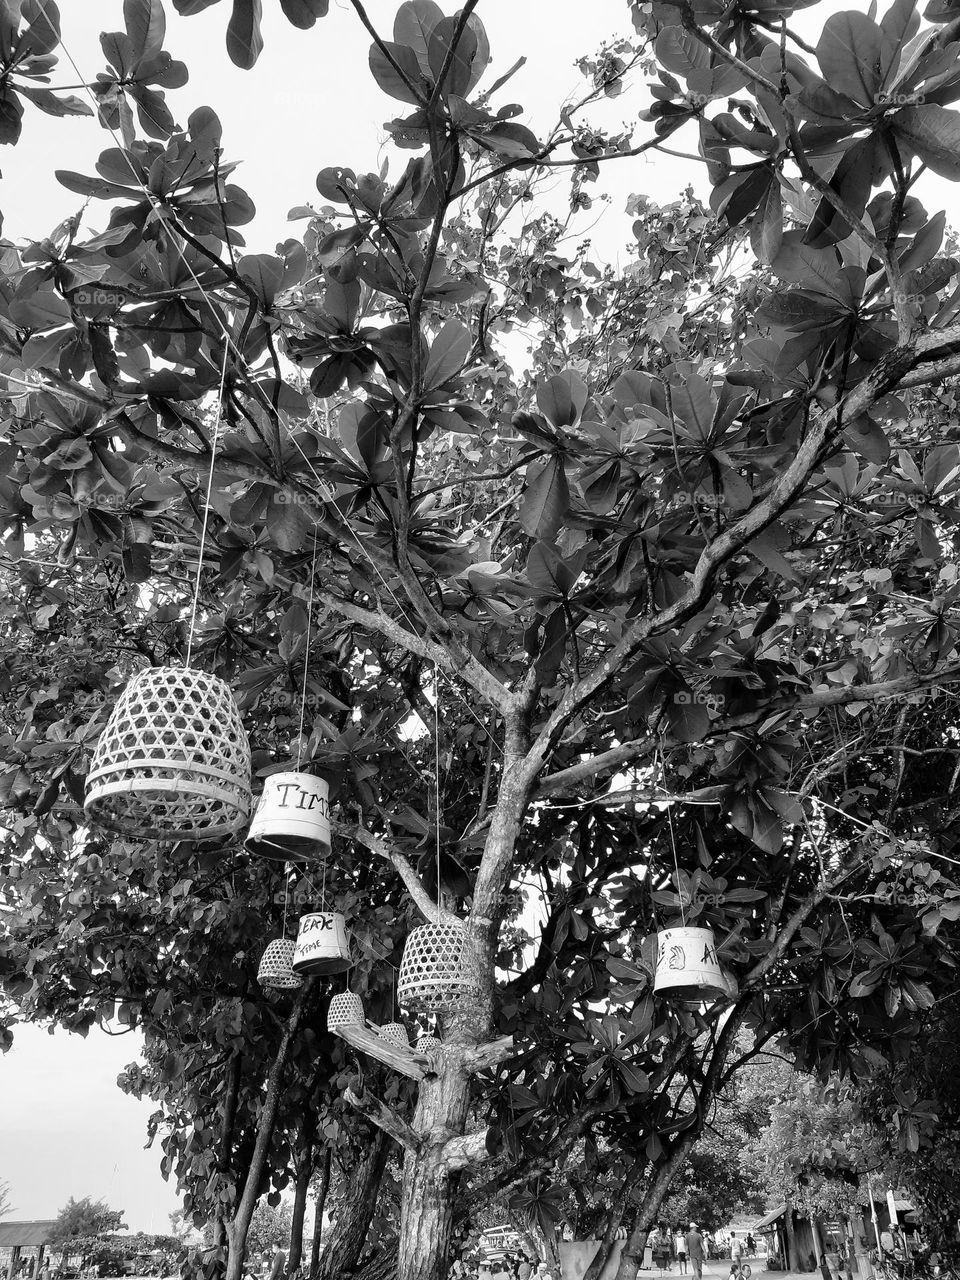 Unique decorations hang in a tree. They are traditional lamps